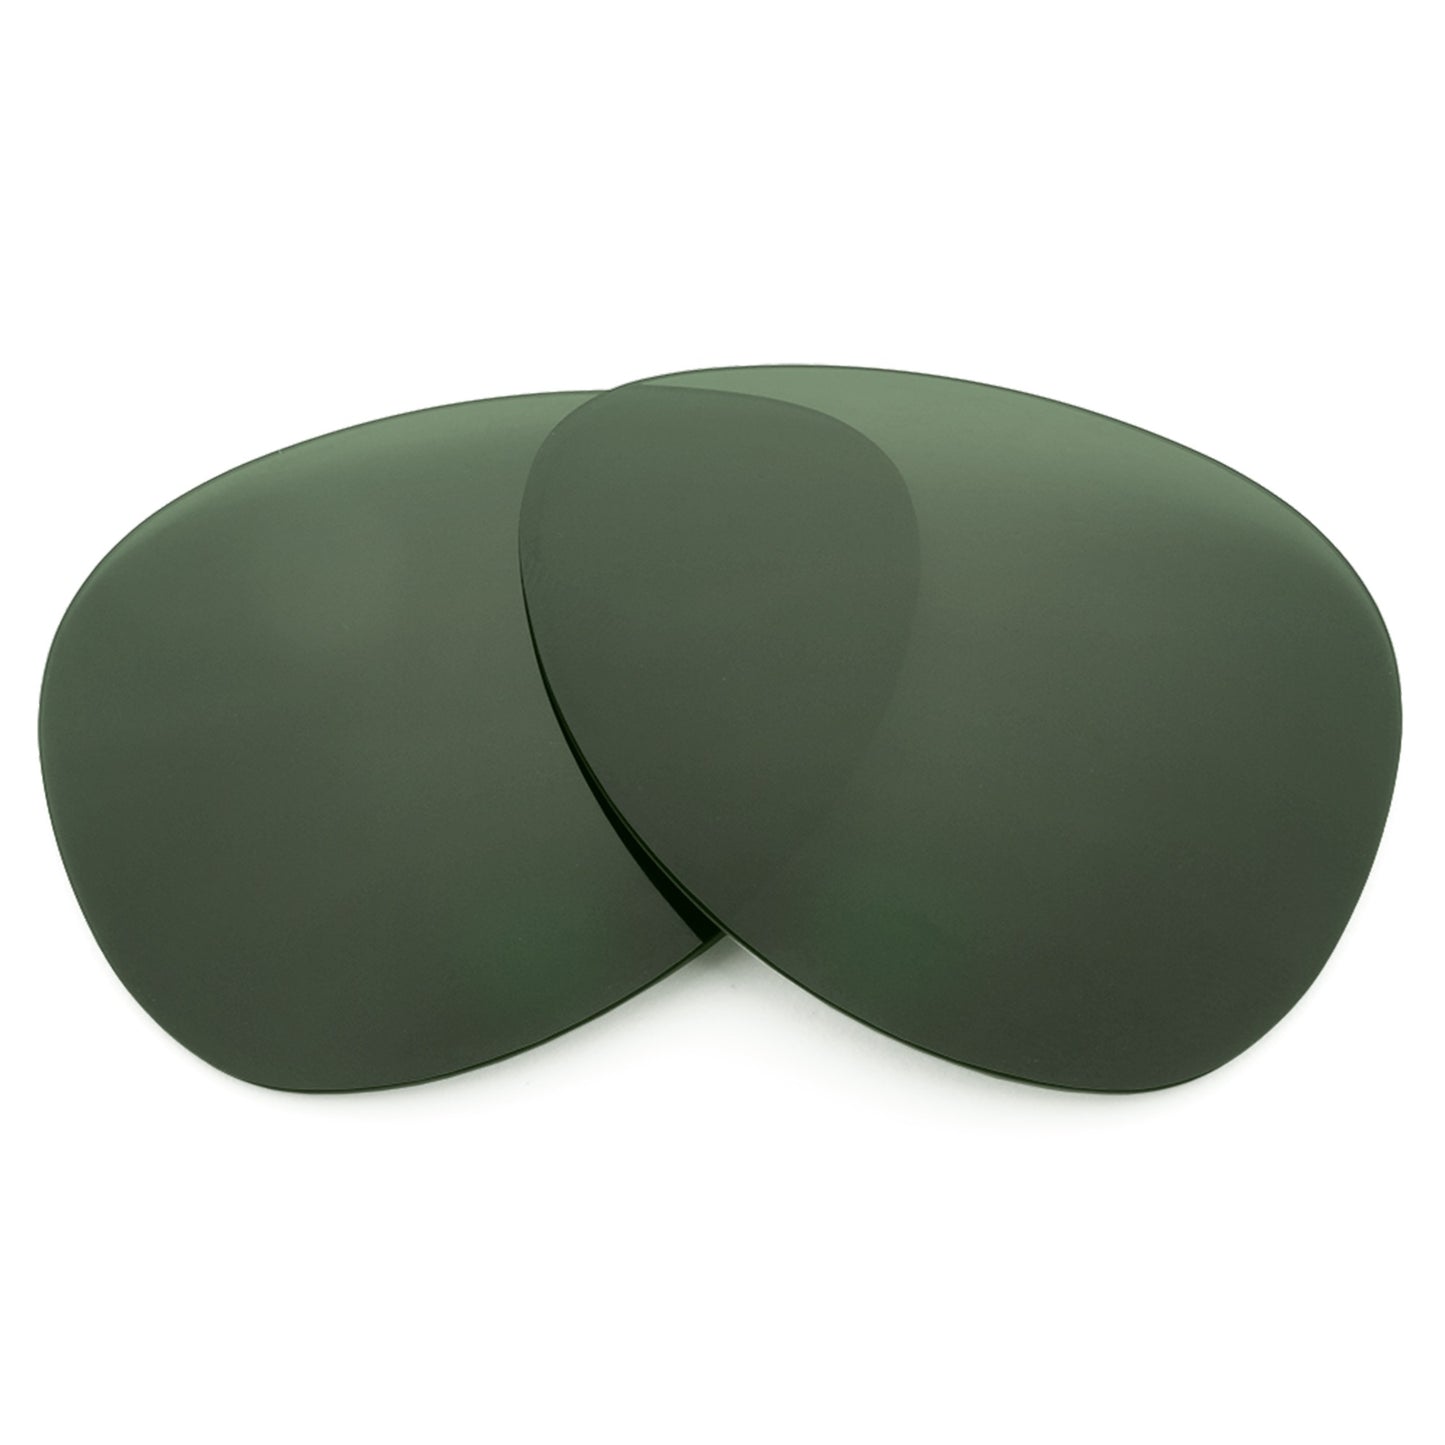 Revant replacement lenses for Ray-Ban Aviator RB3025 58mm Non-Polarized Gray Green